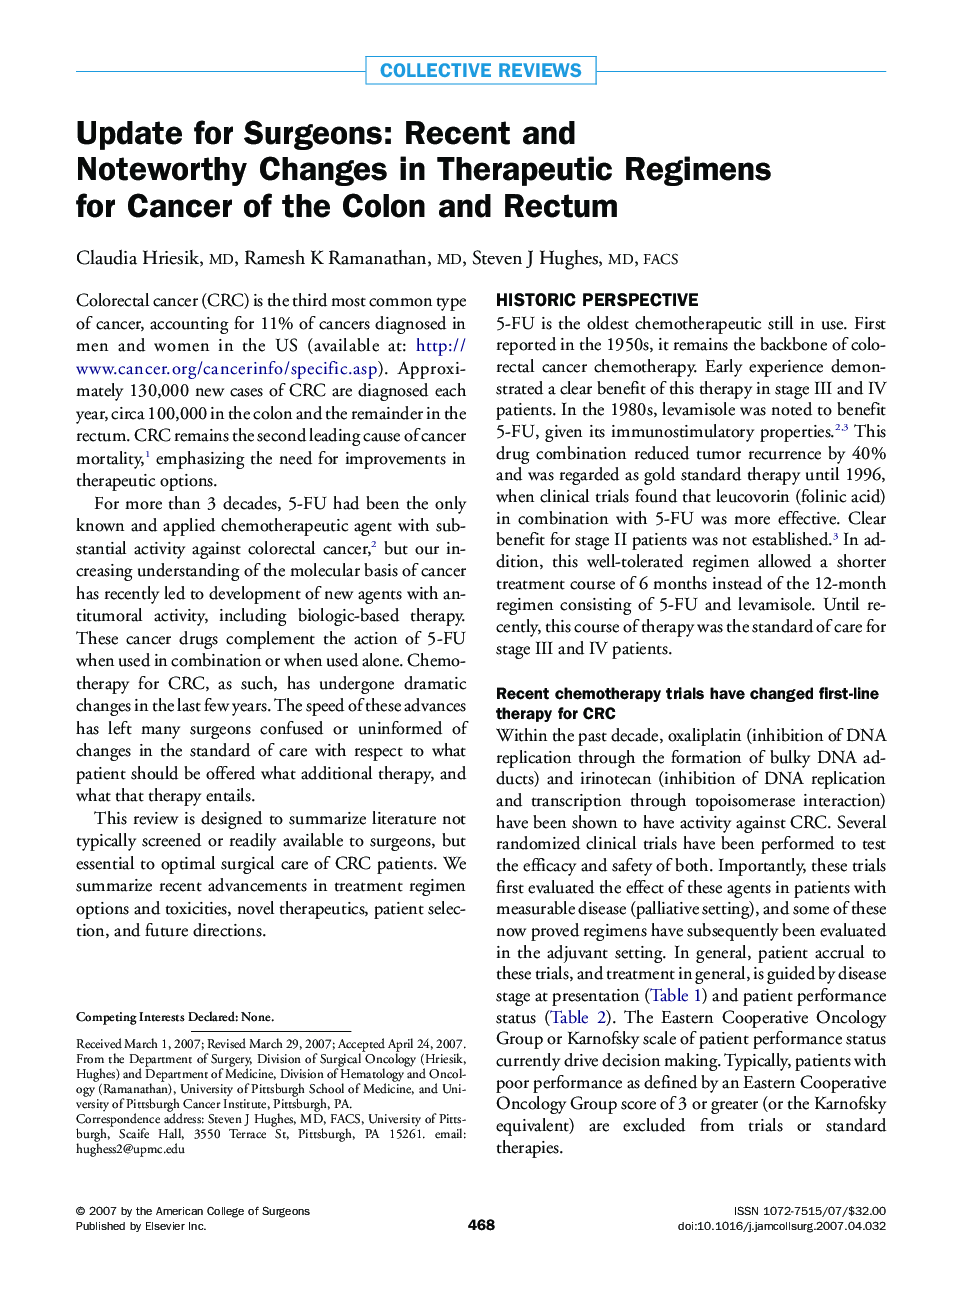 Update for Surgeons: Recent and Noteworthy Changes in Therapeutic Regimens for Cancer of the Colon and Rectum